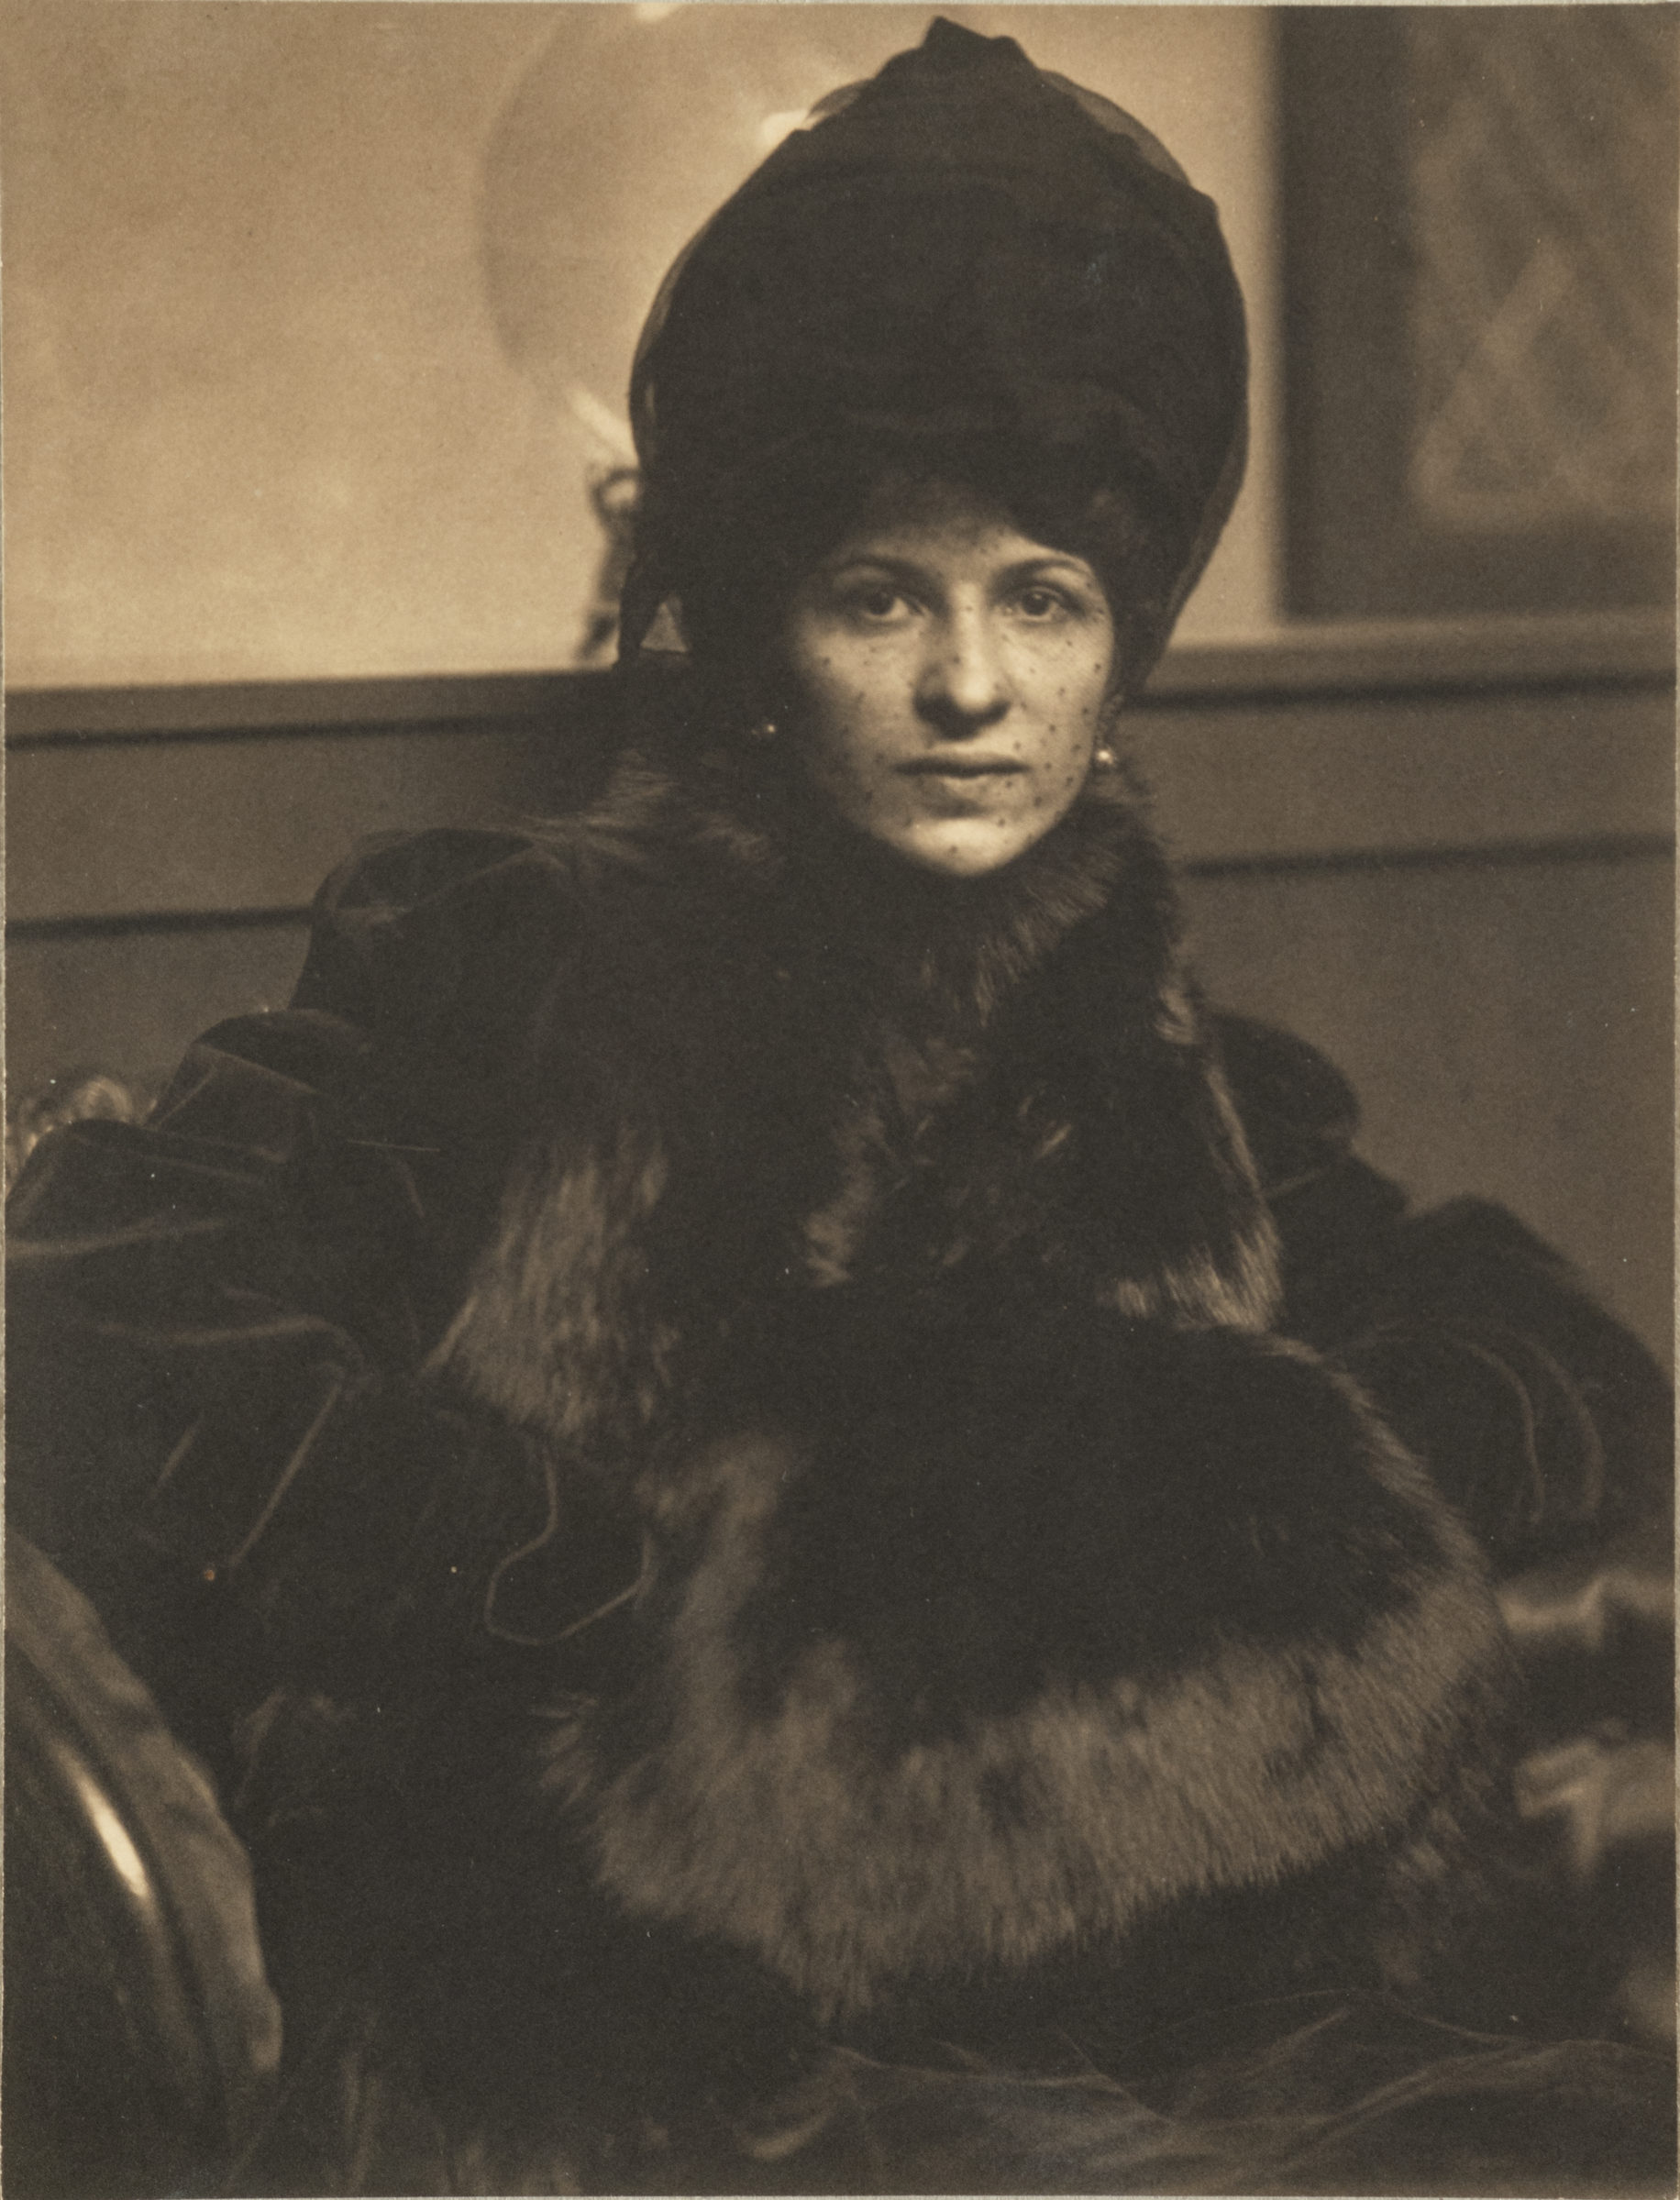 Portrait of Eulabee Dix by Gertrude Käsebier - ca. 1910 - 7 7/8 x 6 in National Museum of Women in the Arts